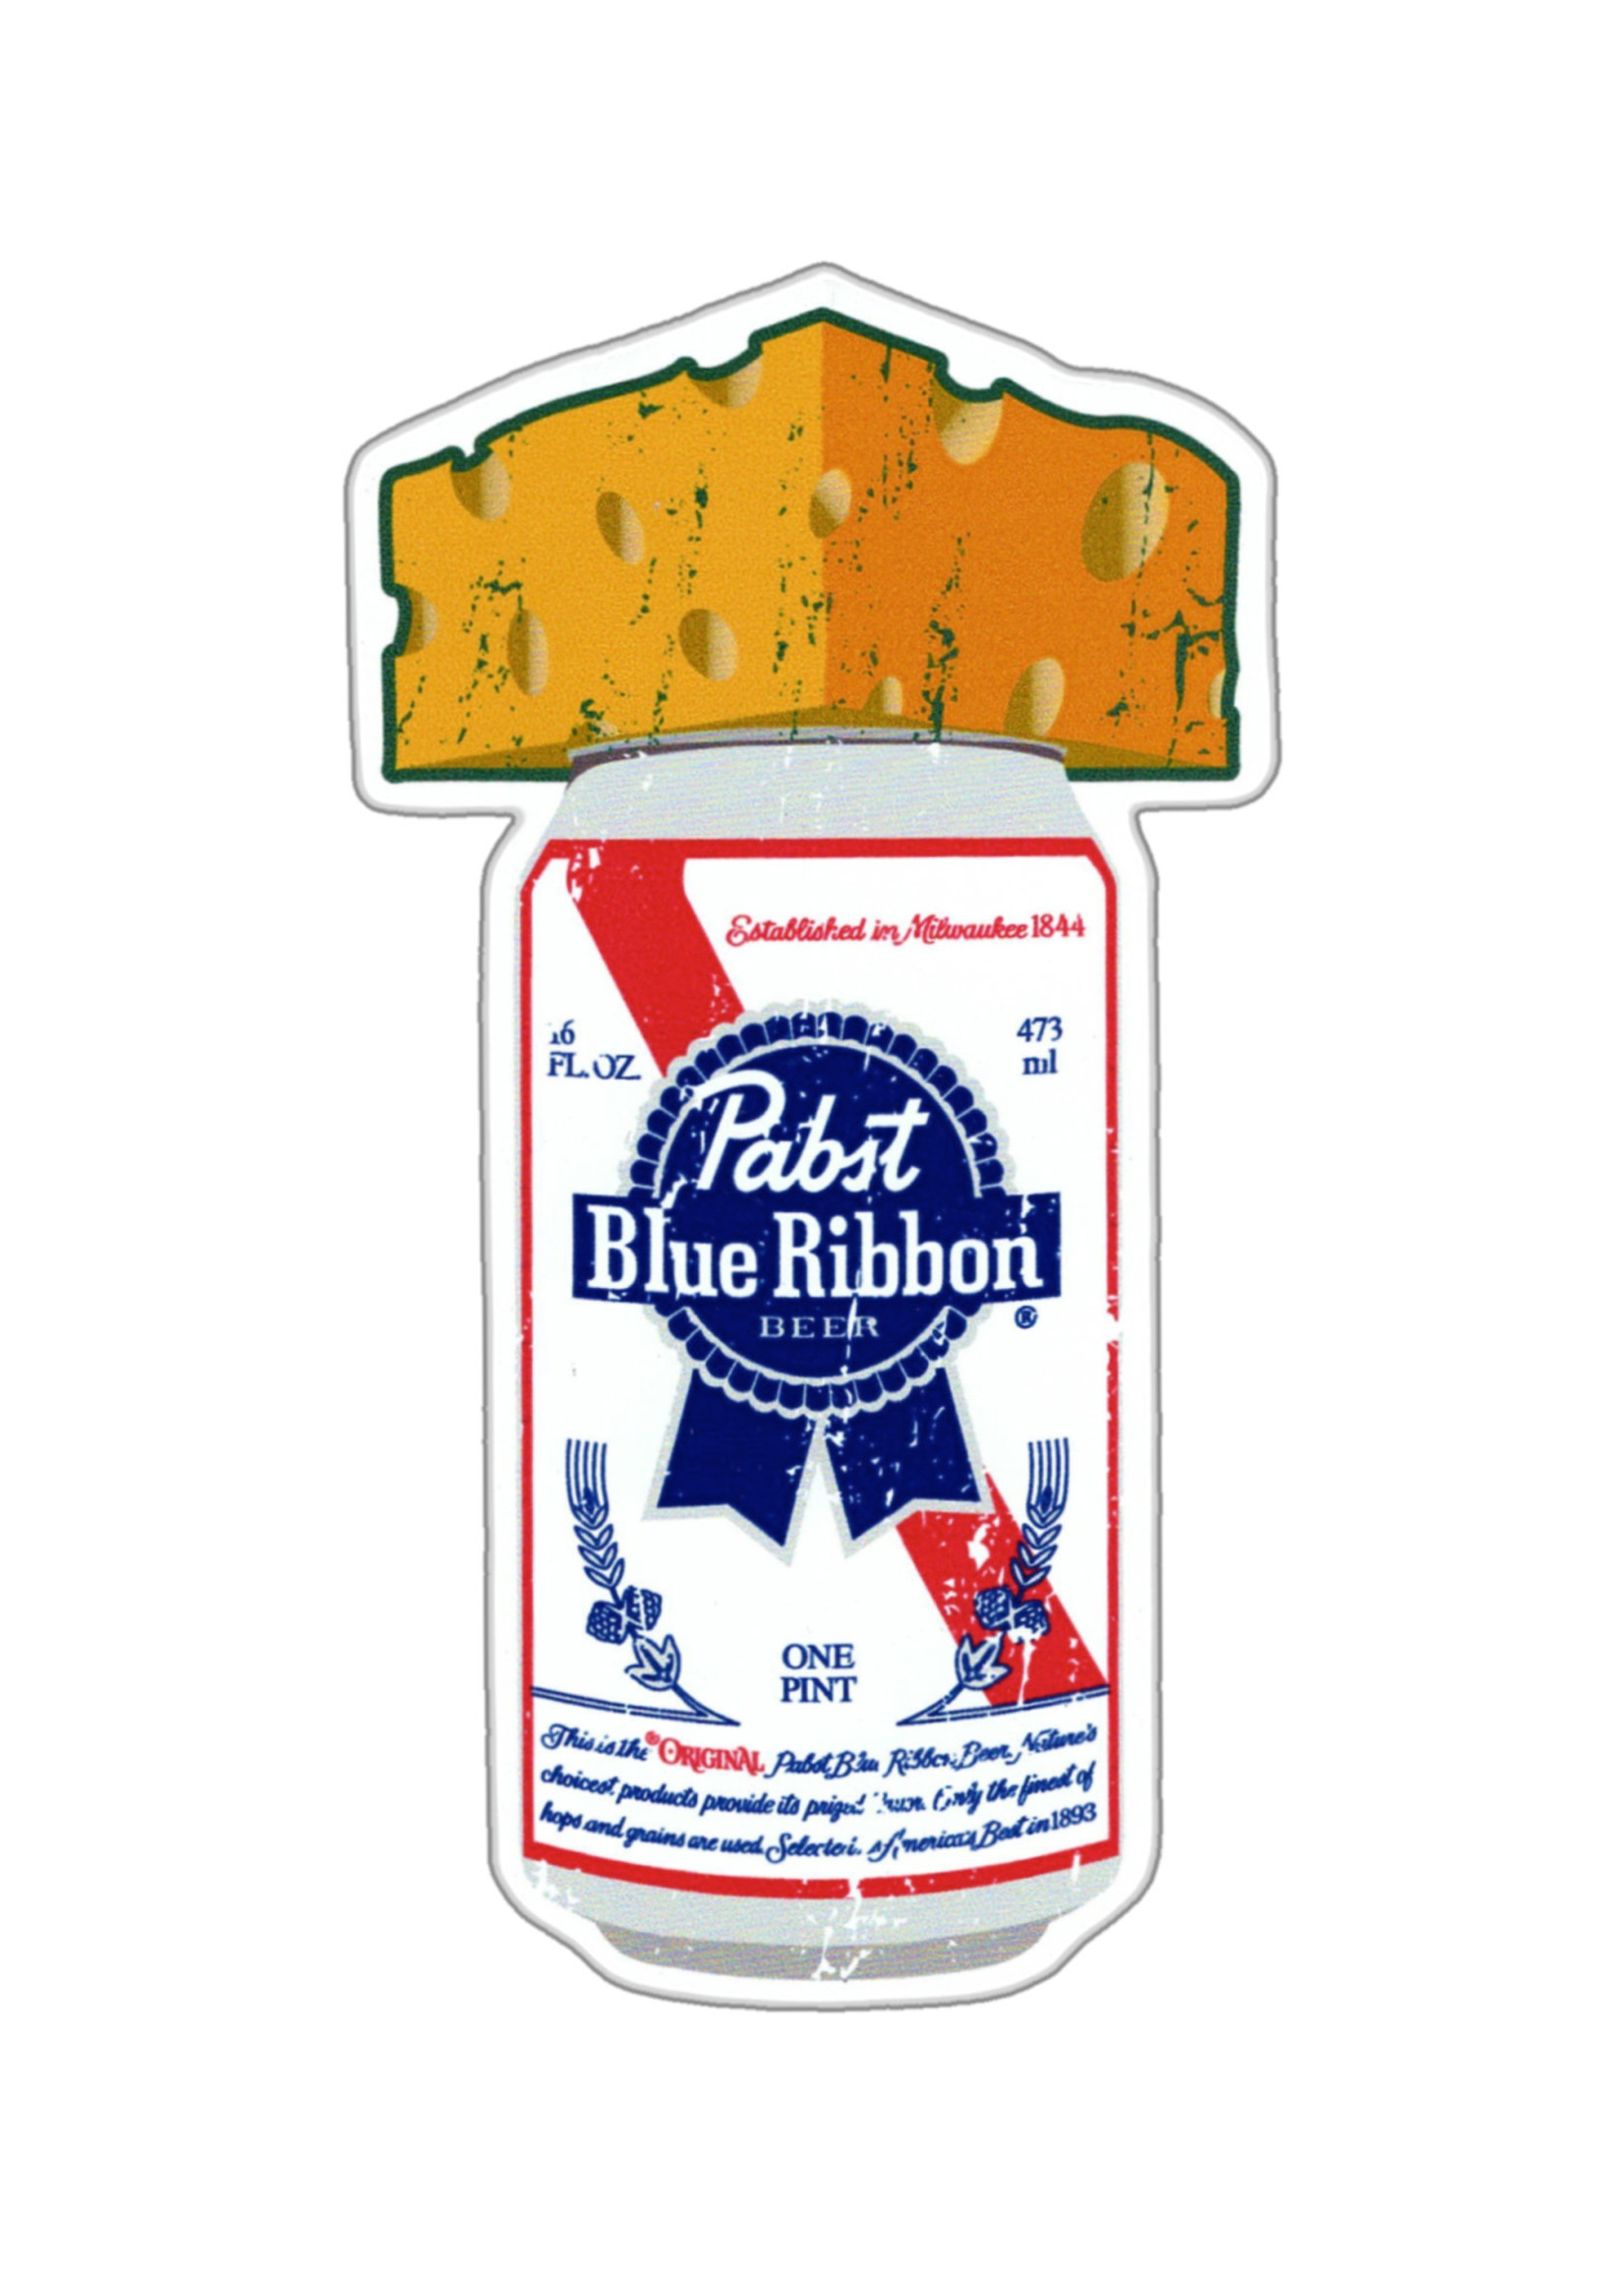 Pabst Pabst Cheesehead Magnet